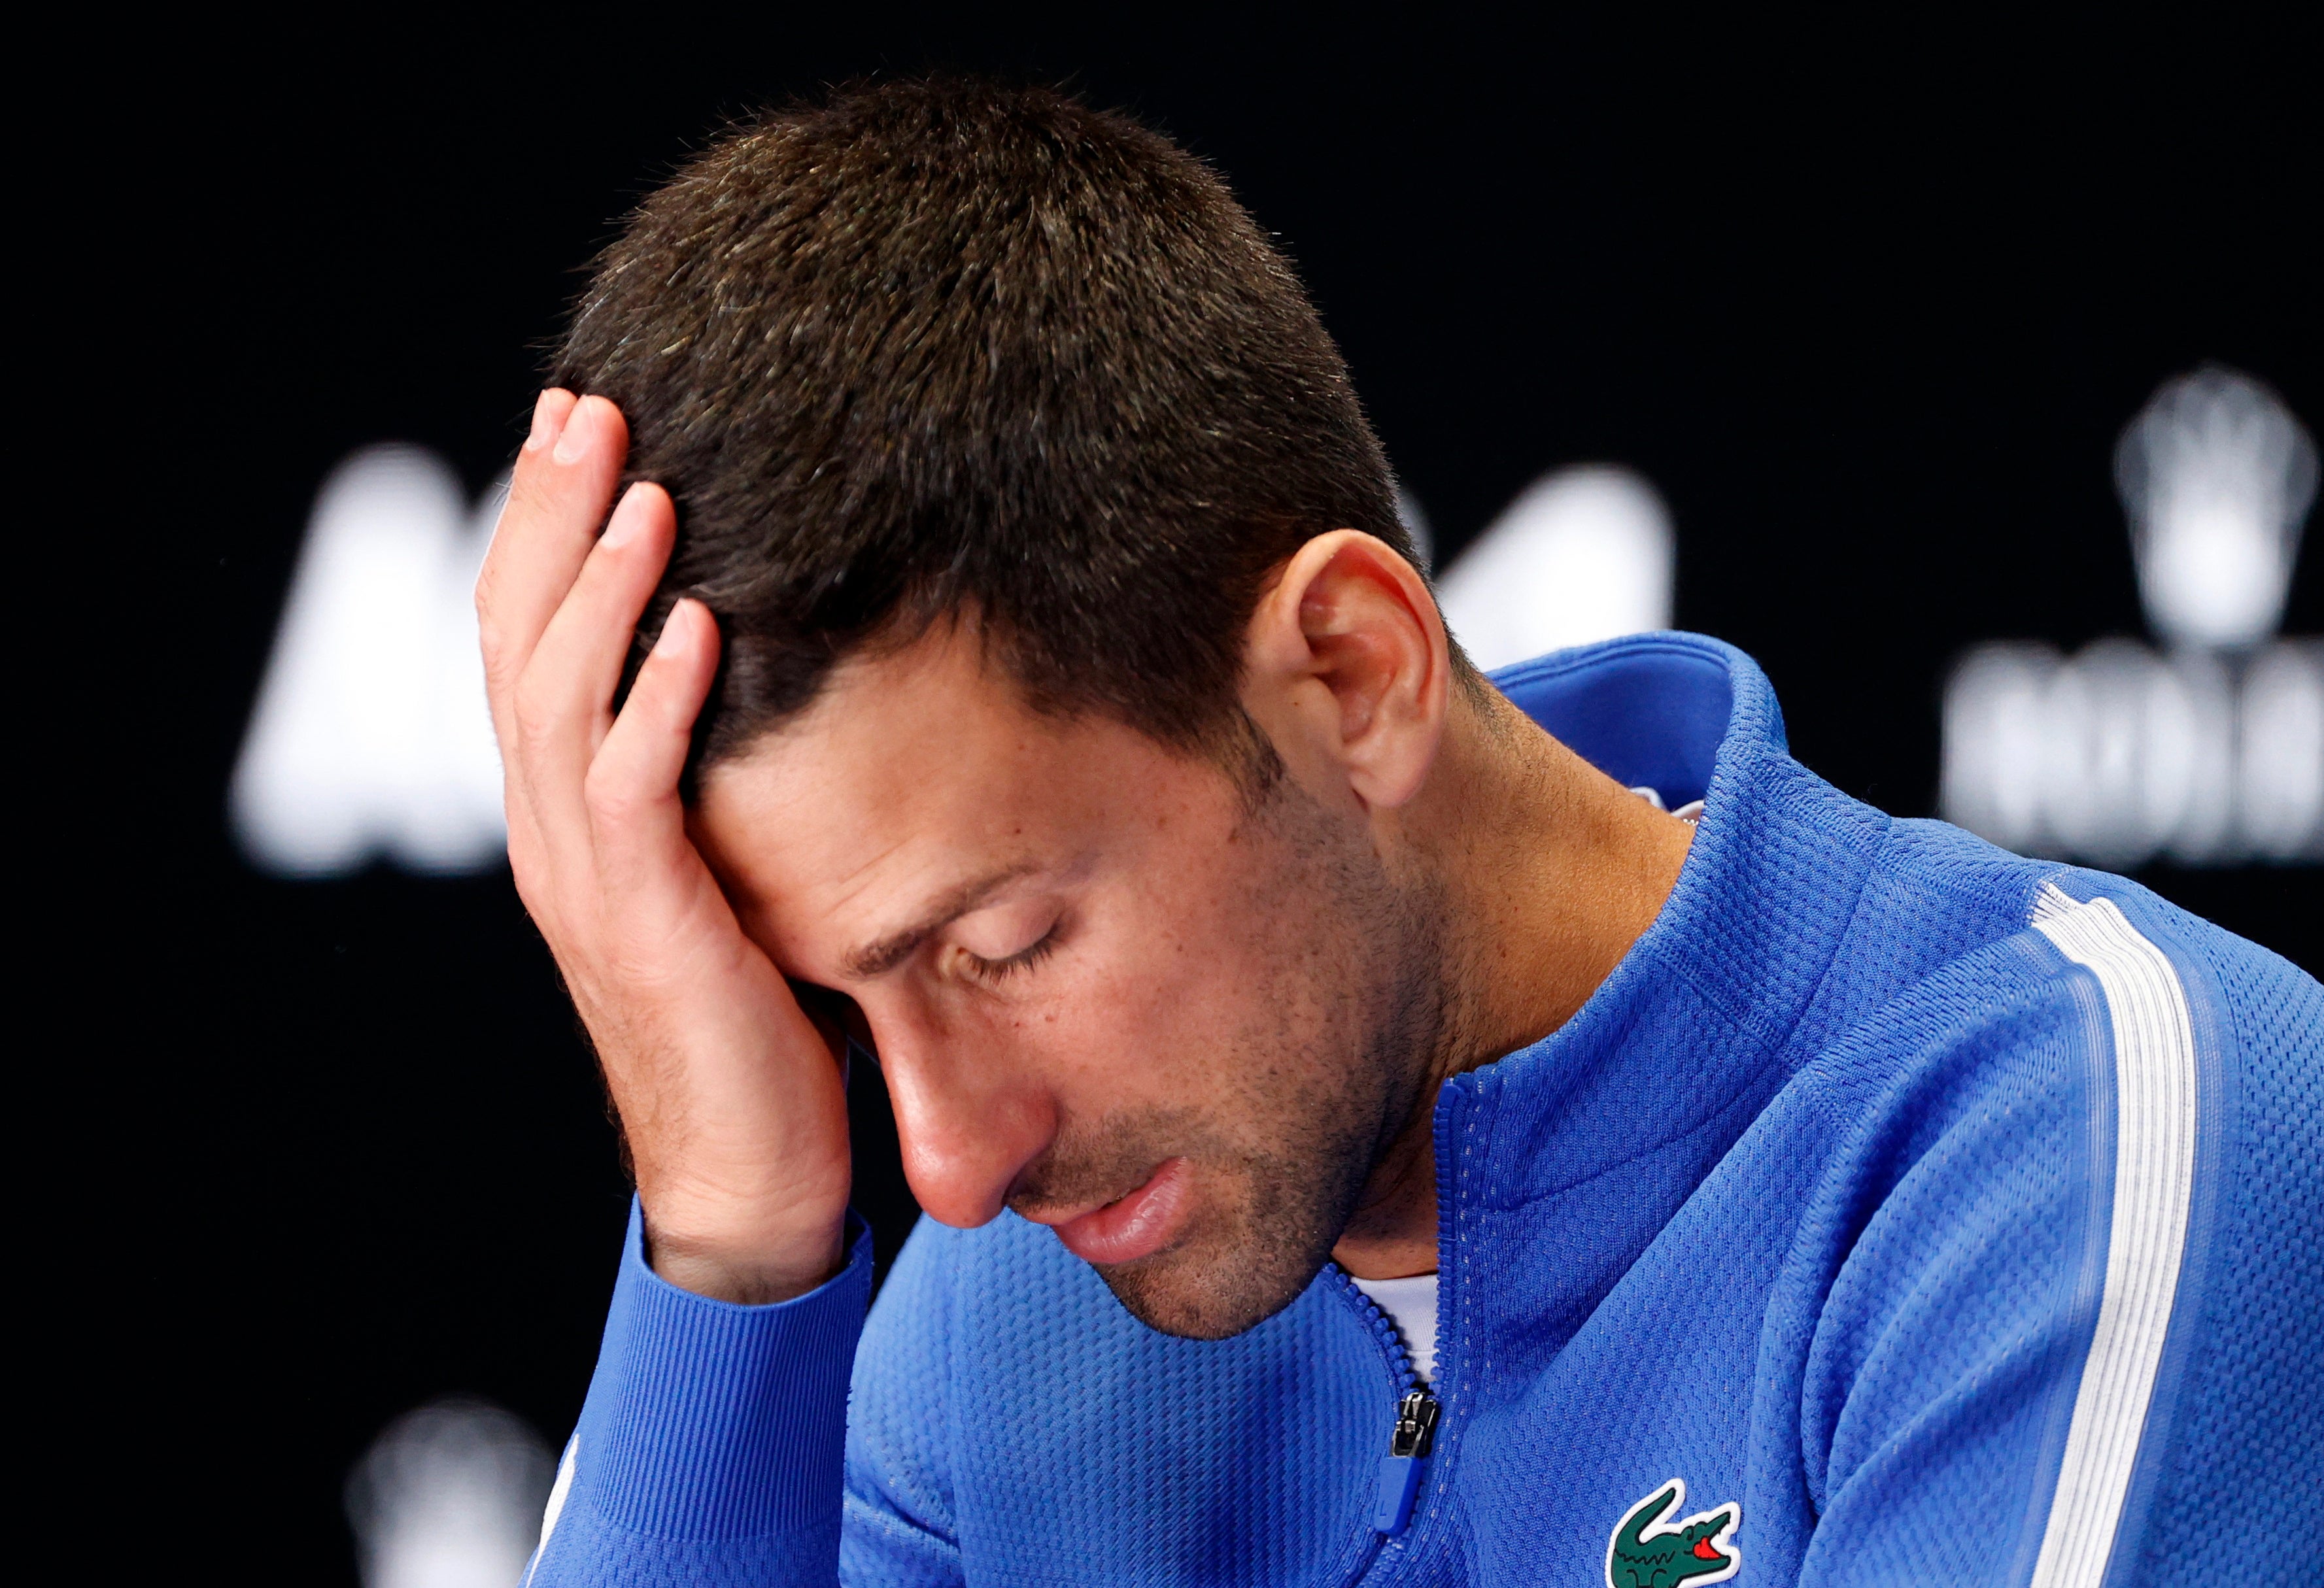 Djokovic said he was ‘outplayed’ in the Australian Open semi-finals